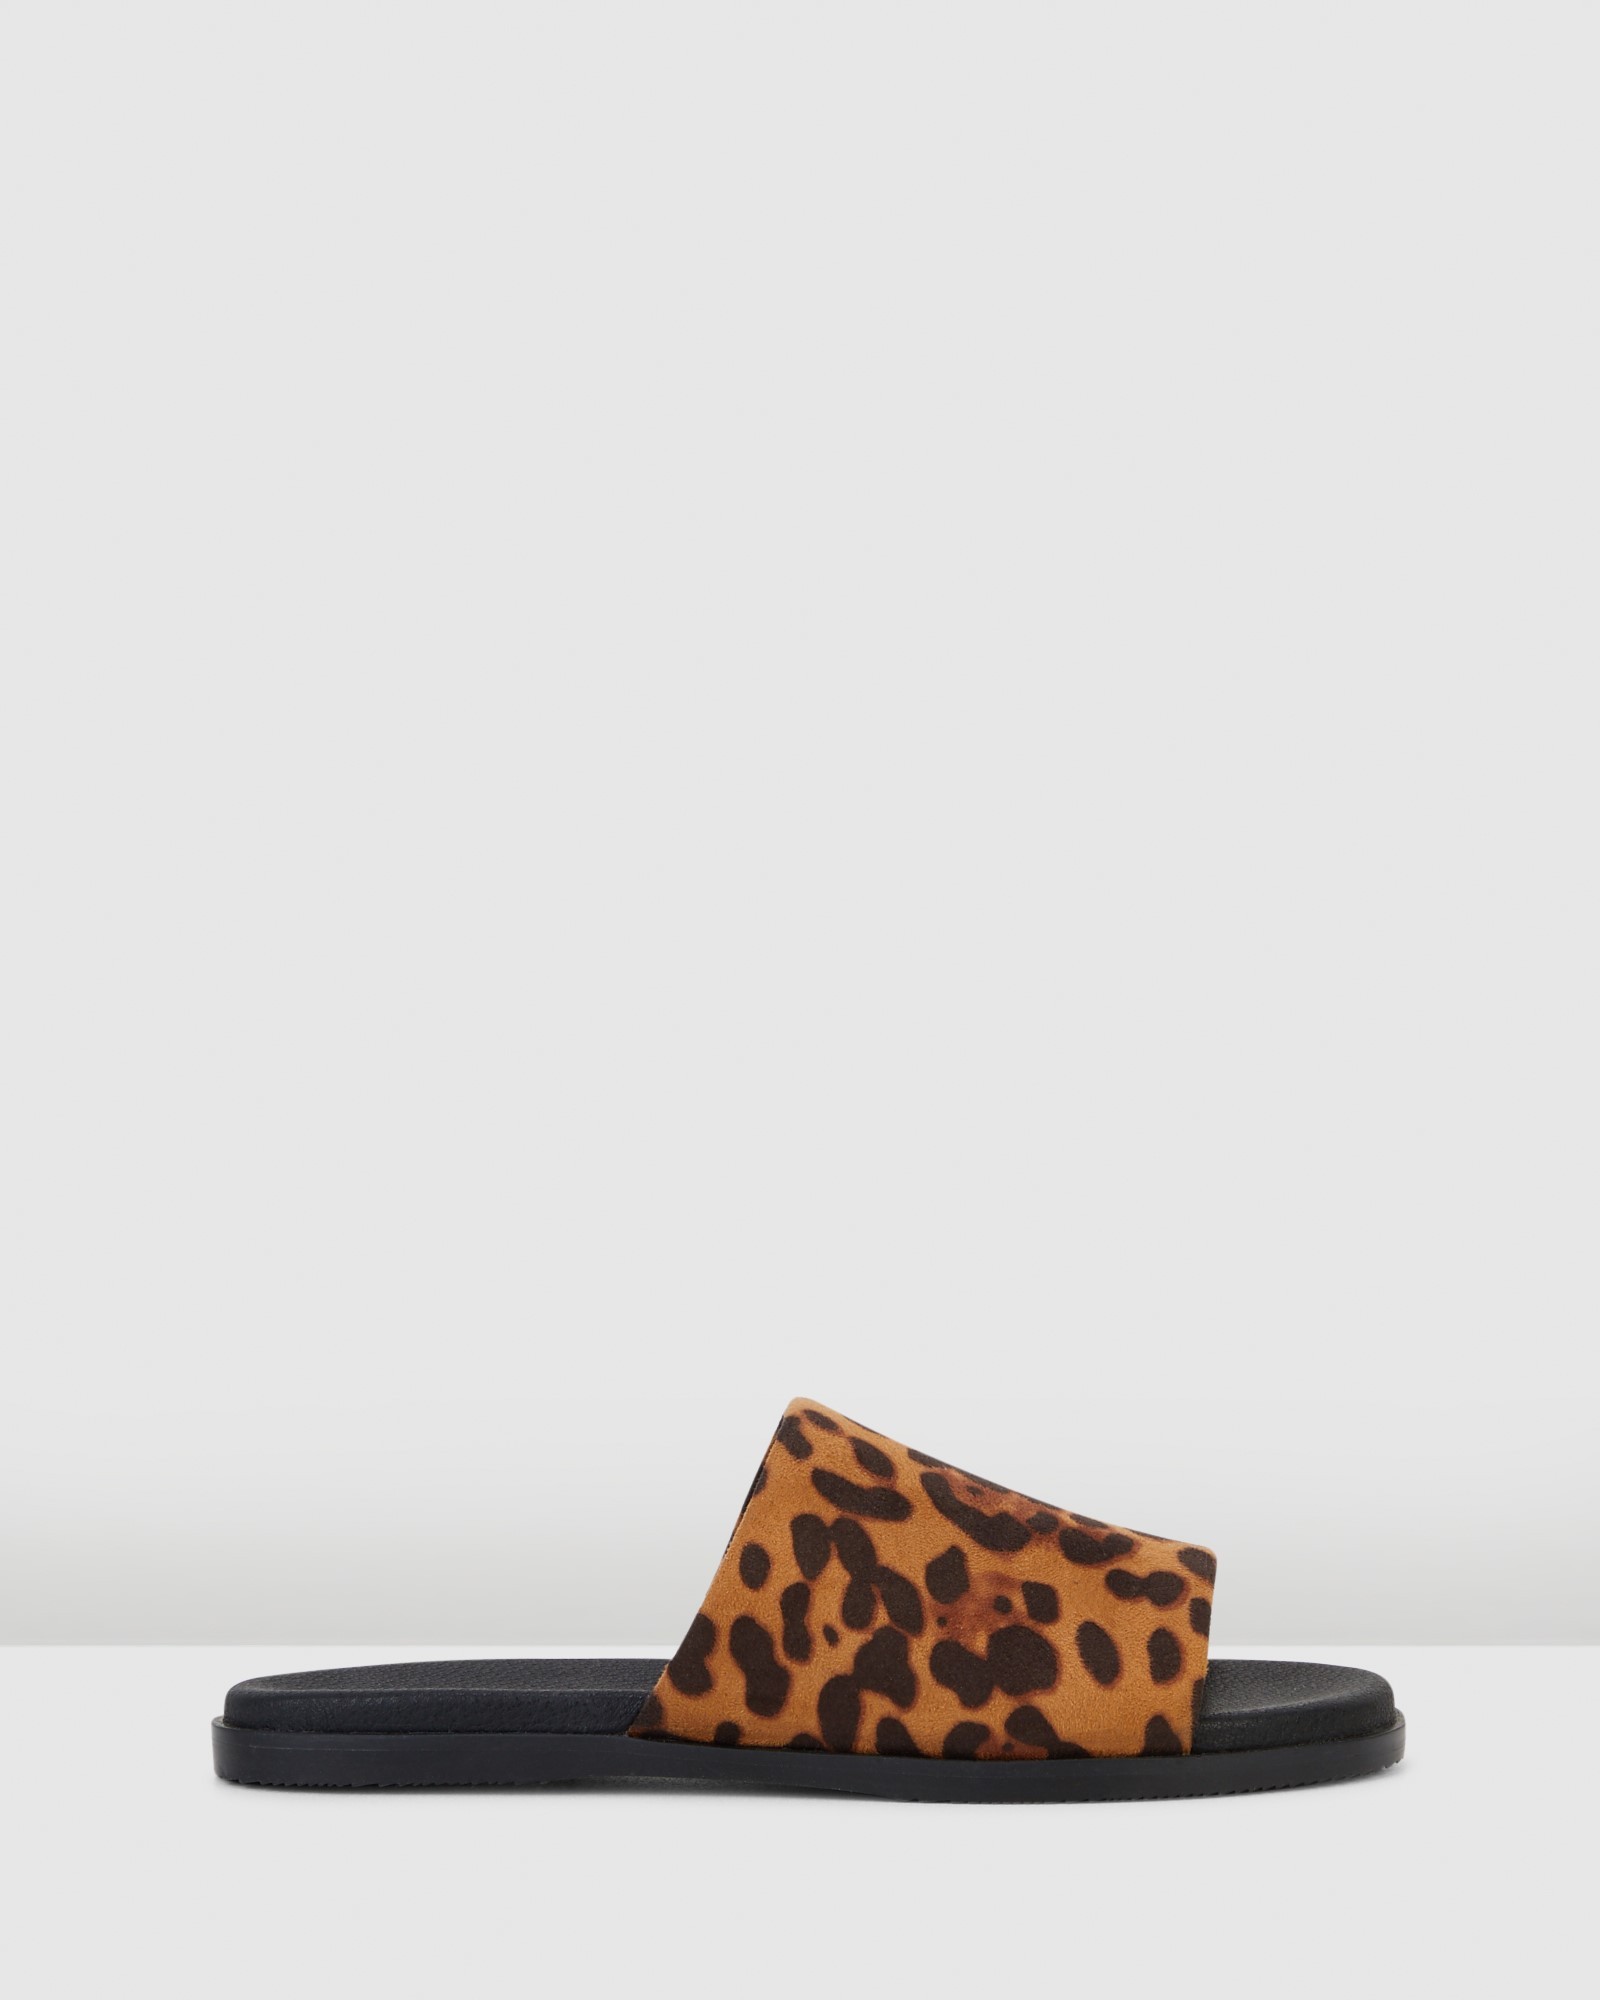 Paradise Leopard by Hush Puppies | ShoeSales